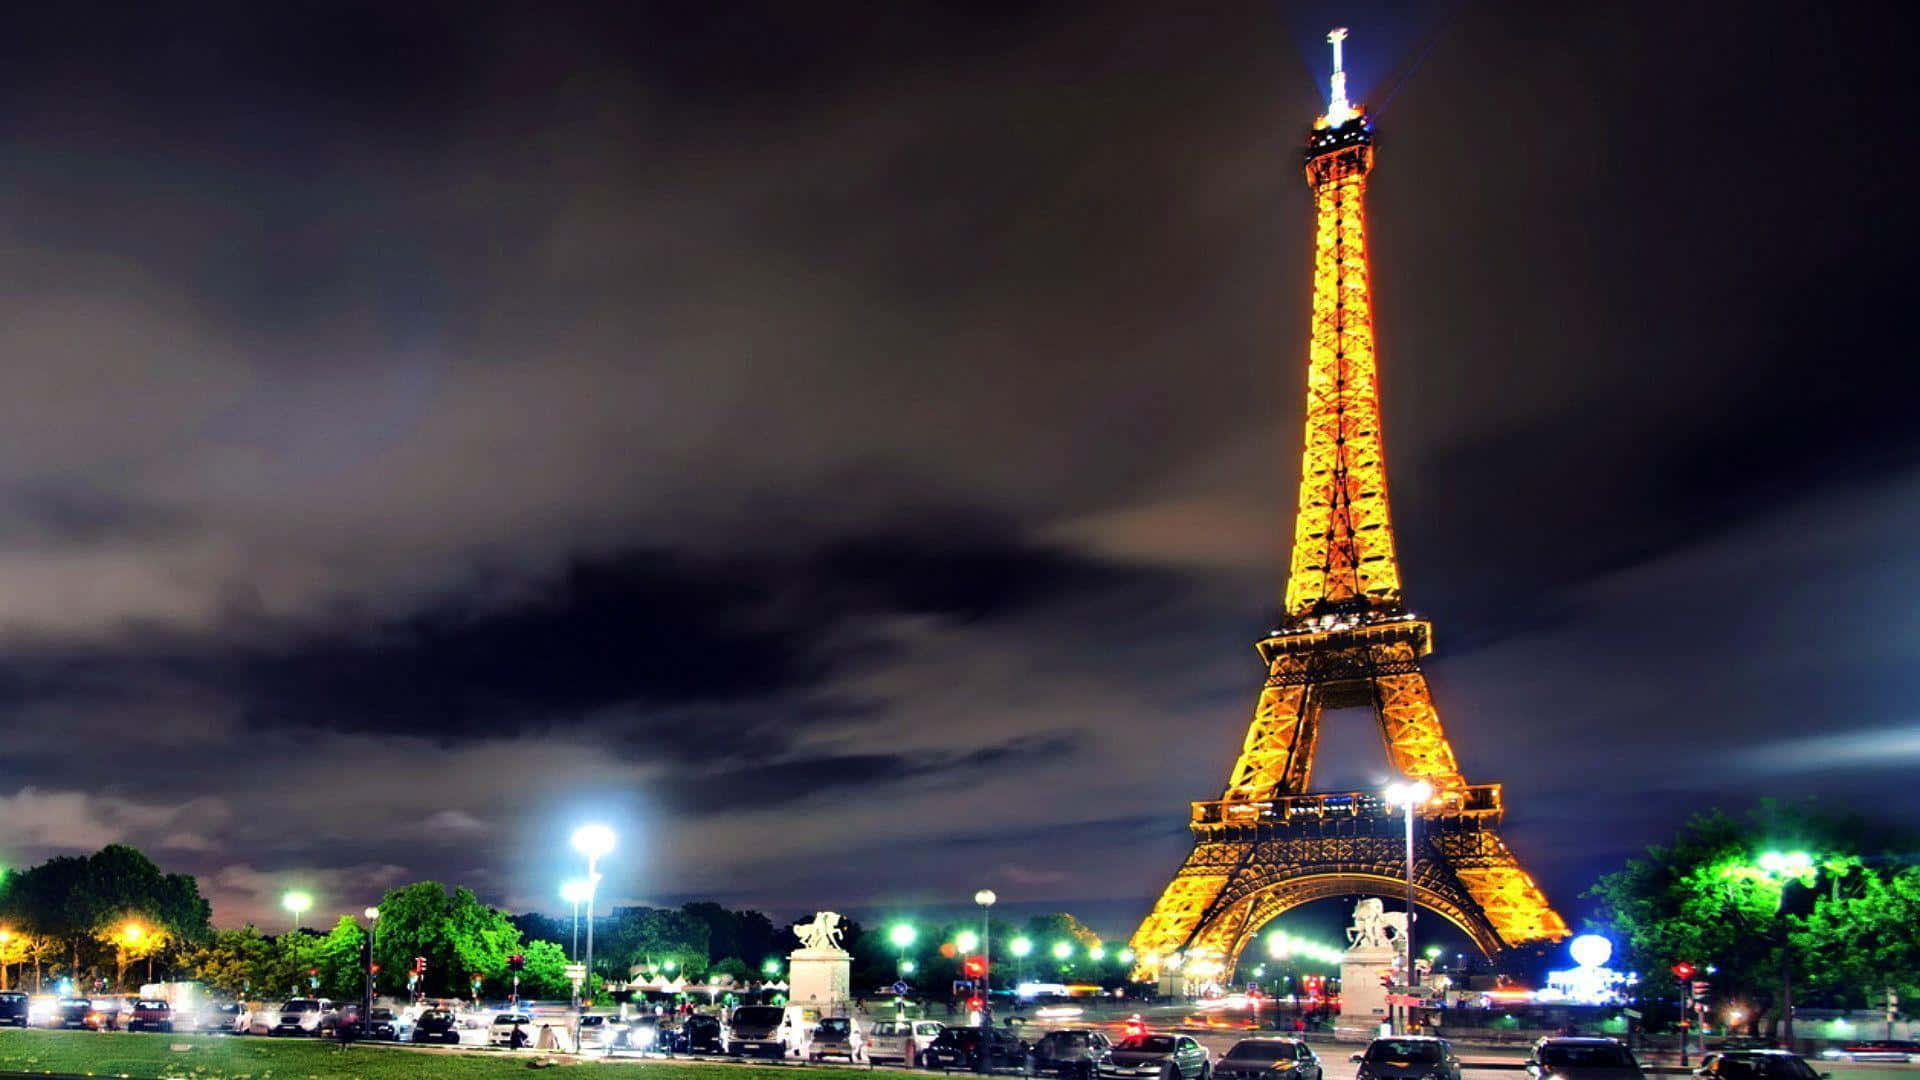 Eiffel Tower, an Iconic Structure of Paris